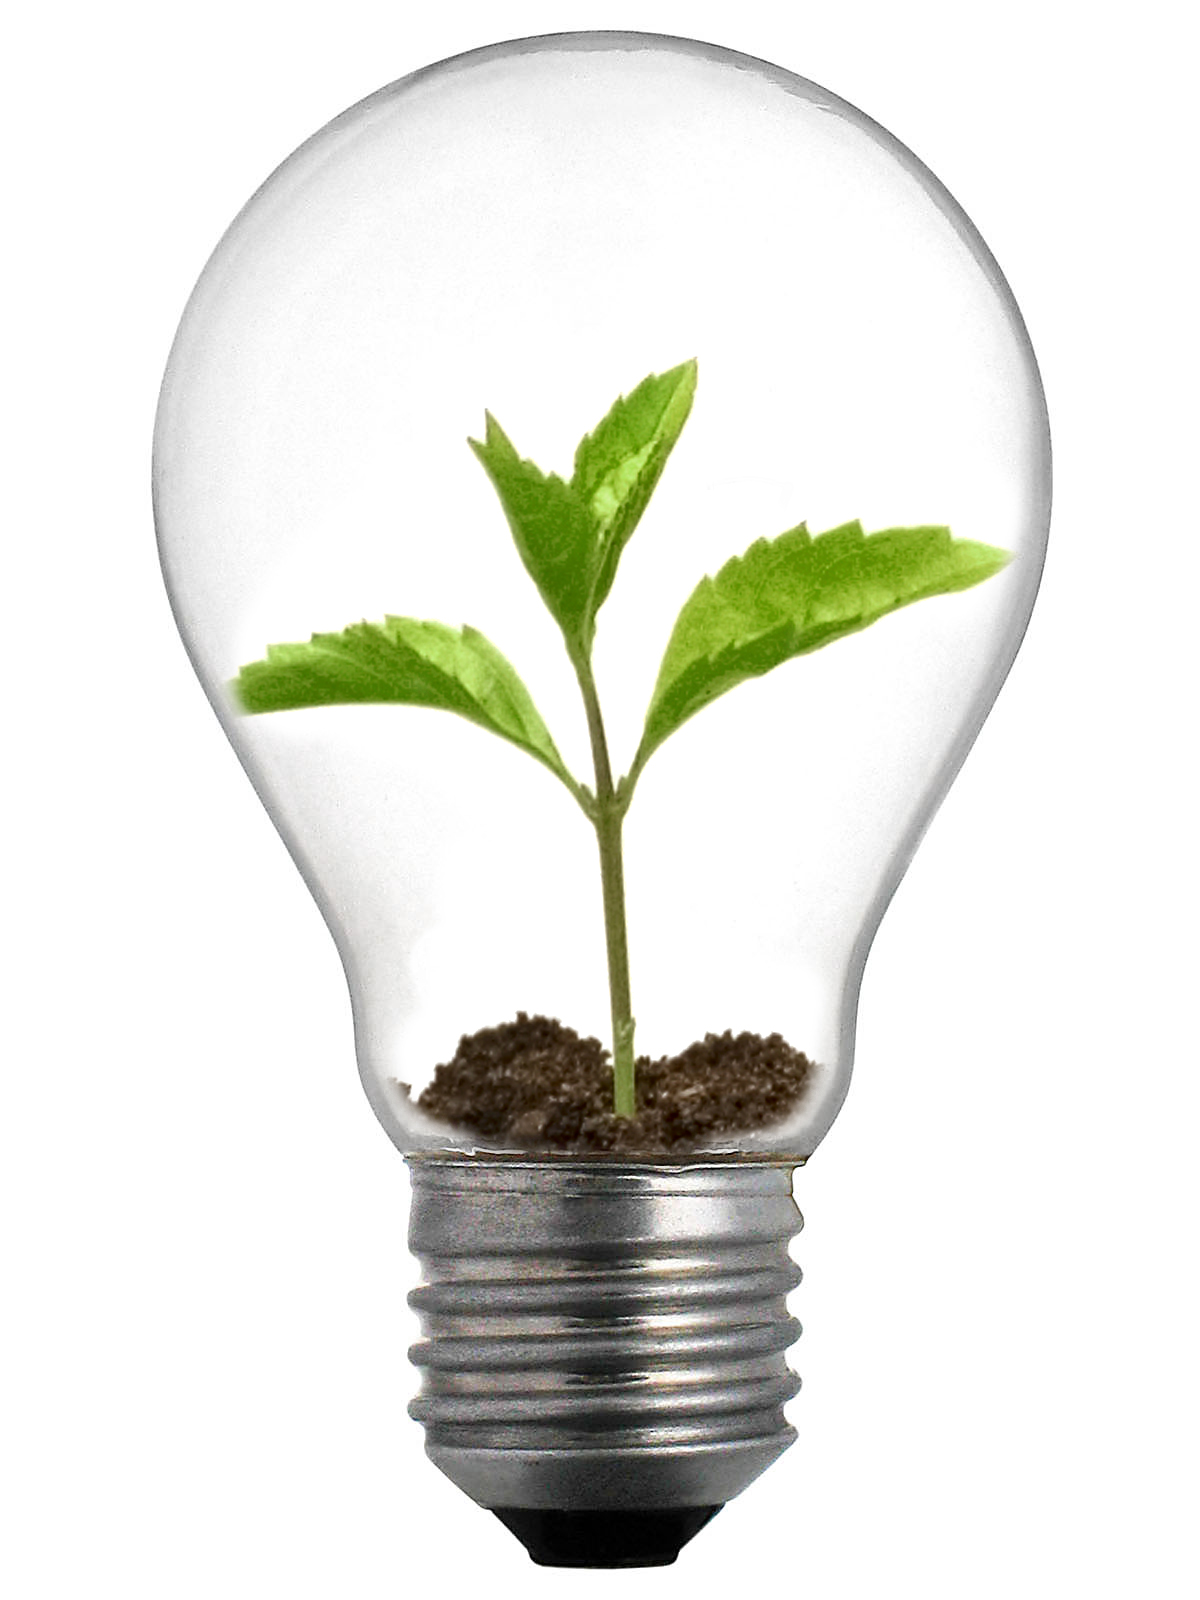 A lightbulb with a seedling in it